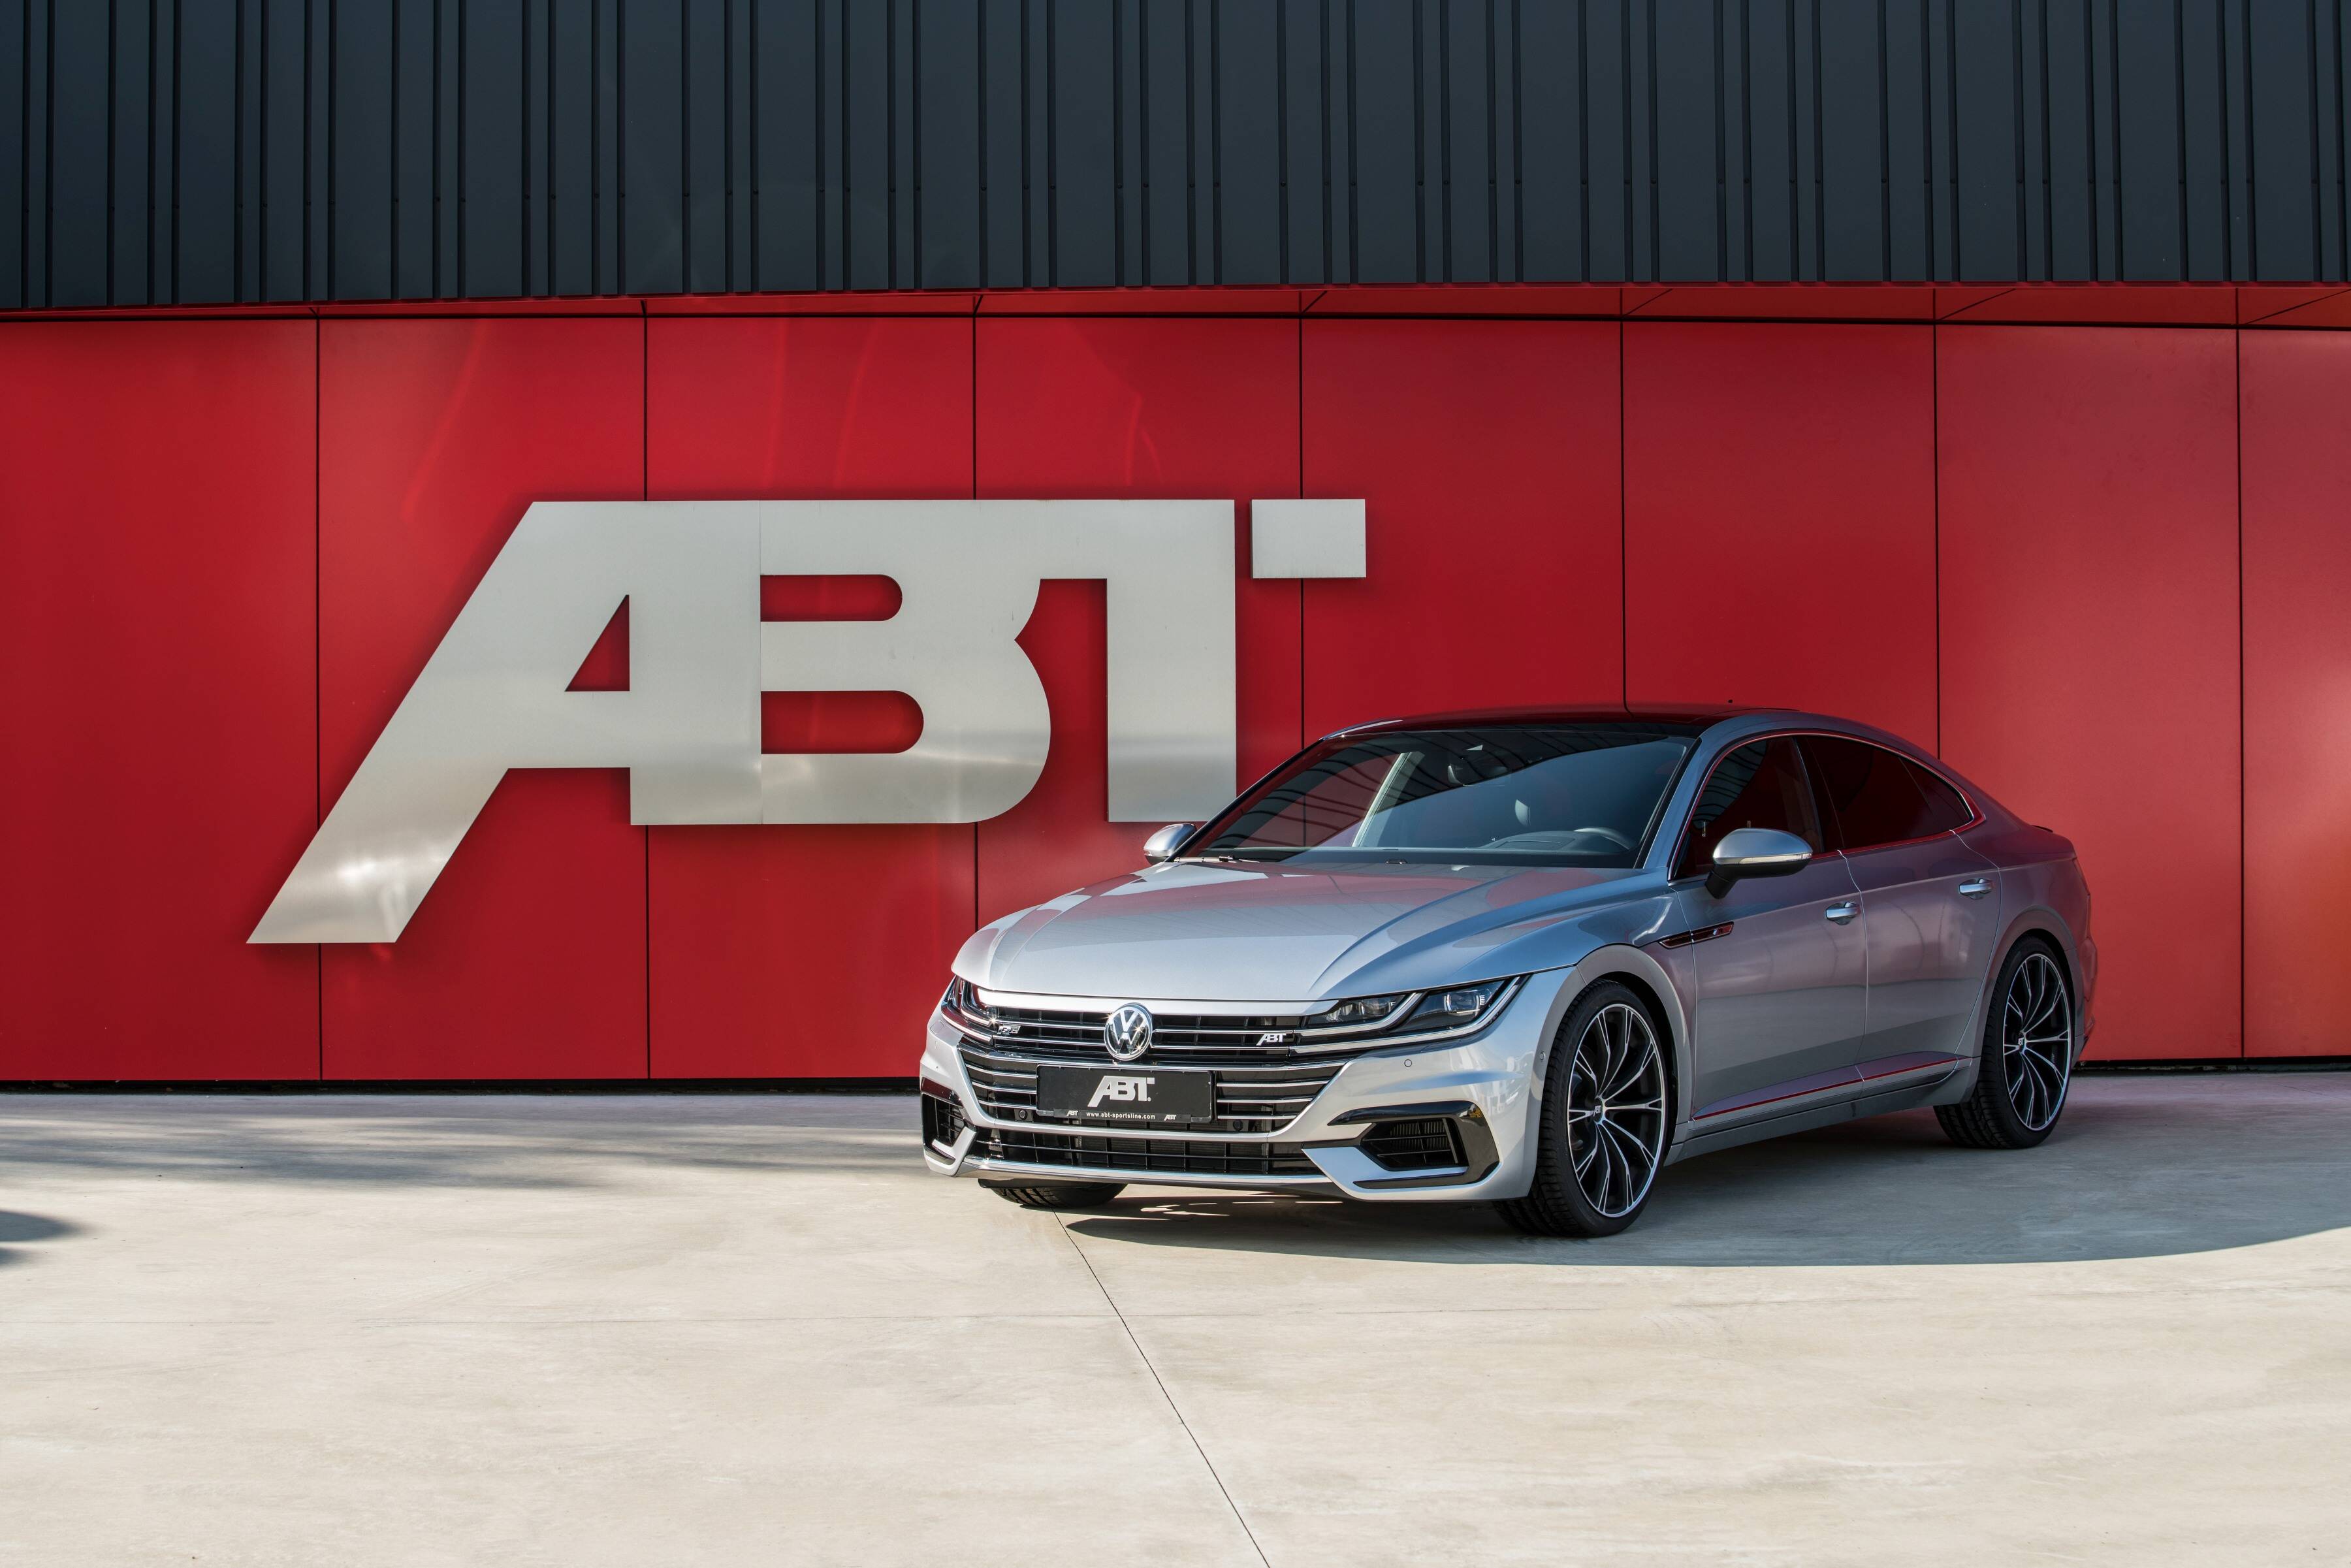 Fast work of art: VW Arteon with 336 hp and 420 Nm - Audi Tuning